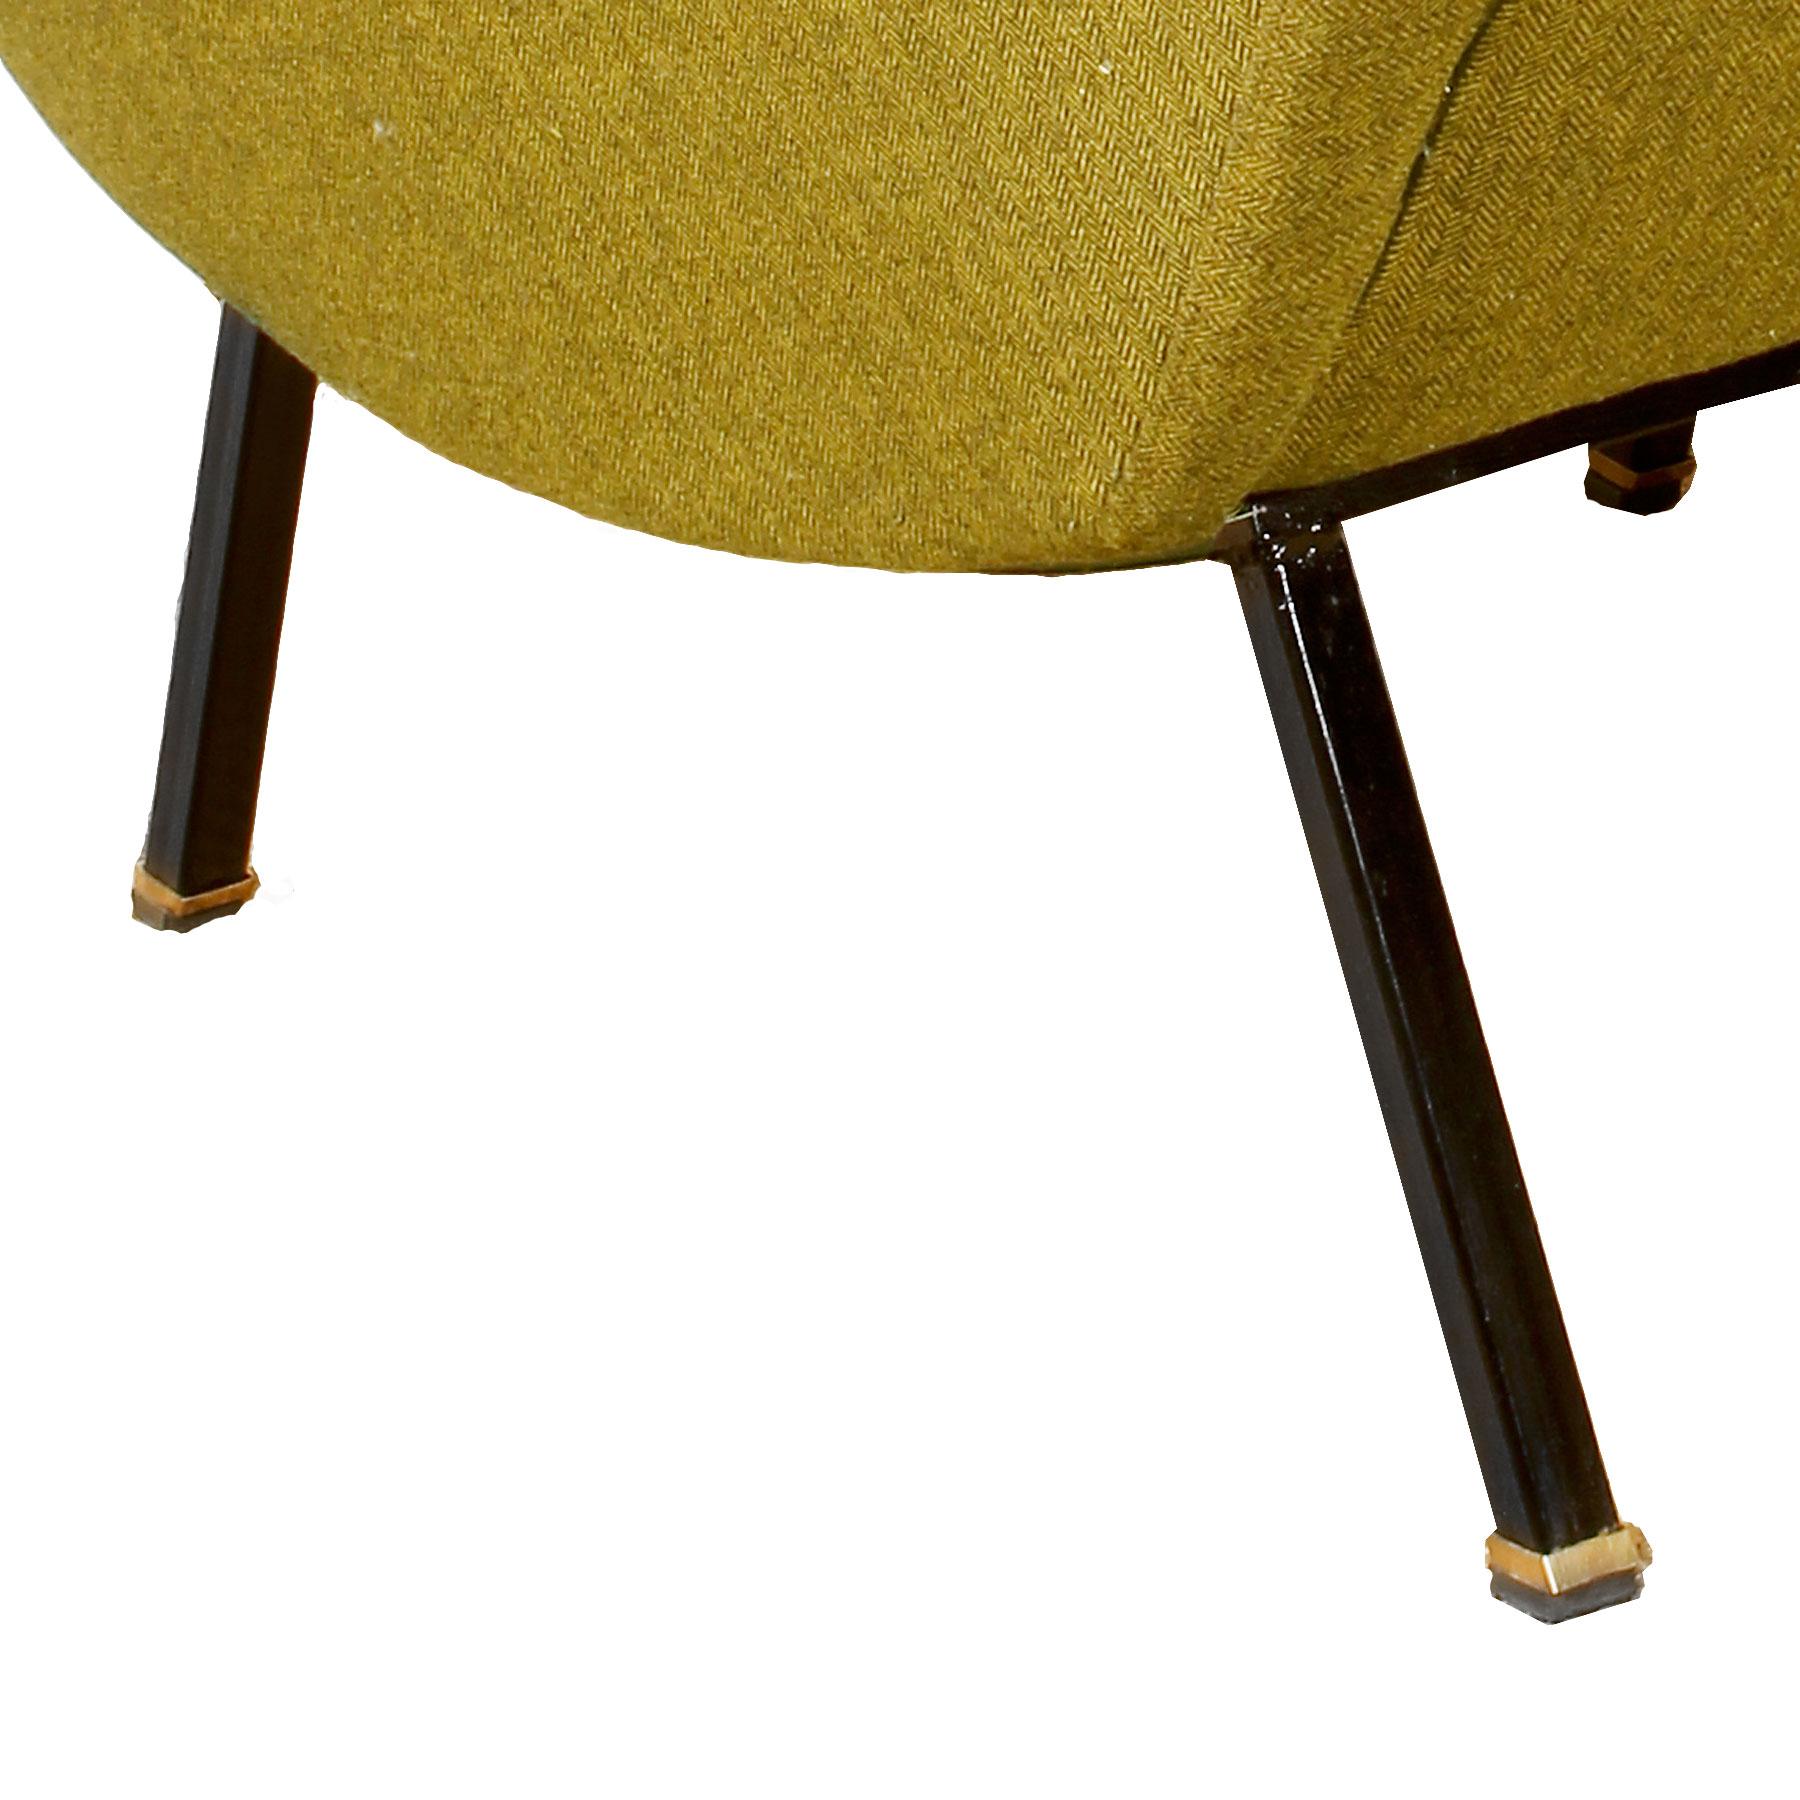 Pair of Mid-Century Modern Armchairs in New Mottled Yellow Fabric - Italy, 1960s For Sale 4